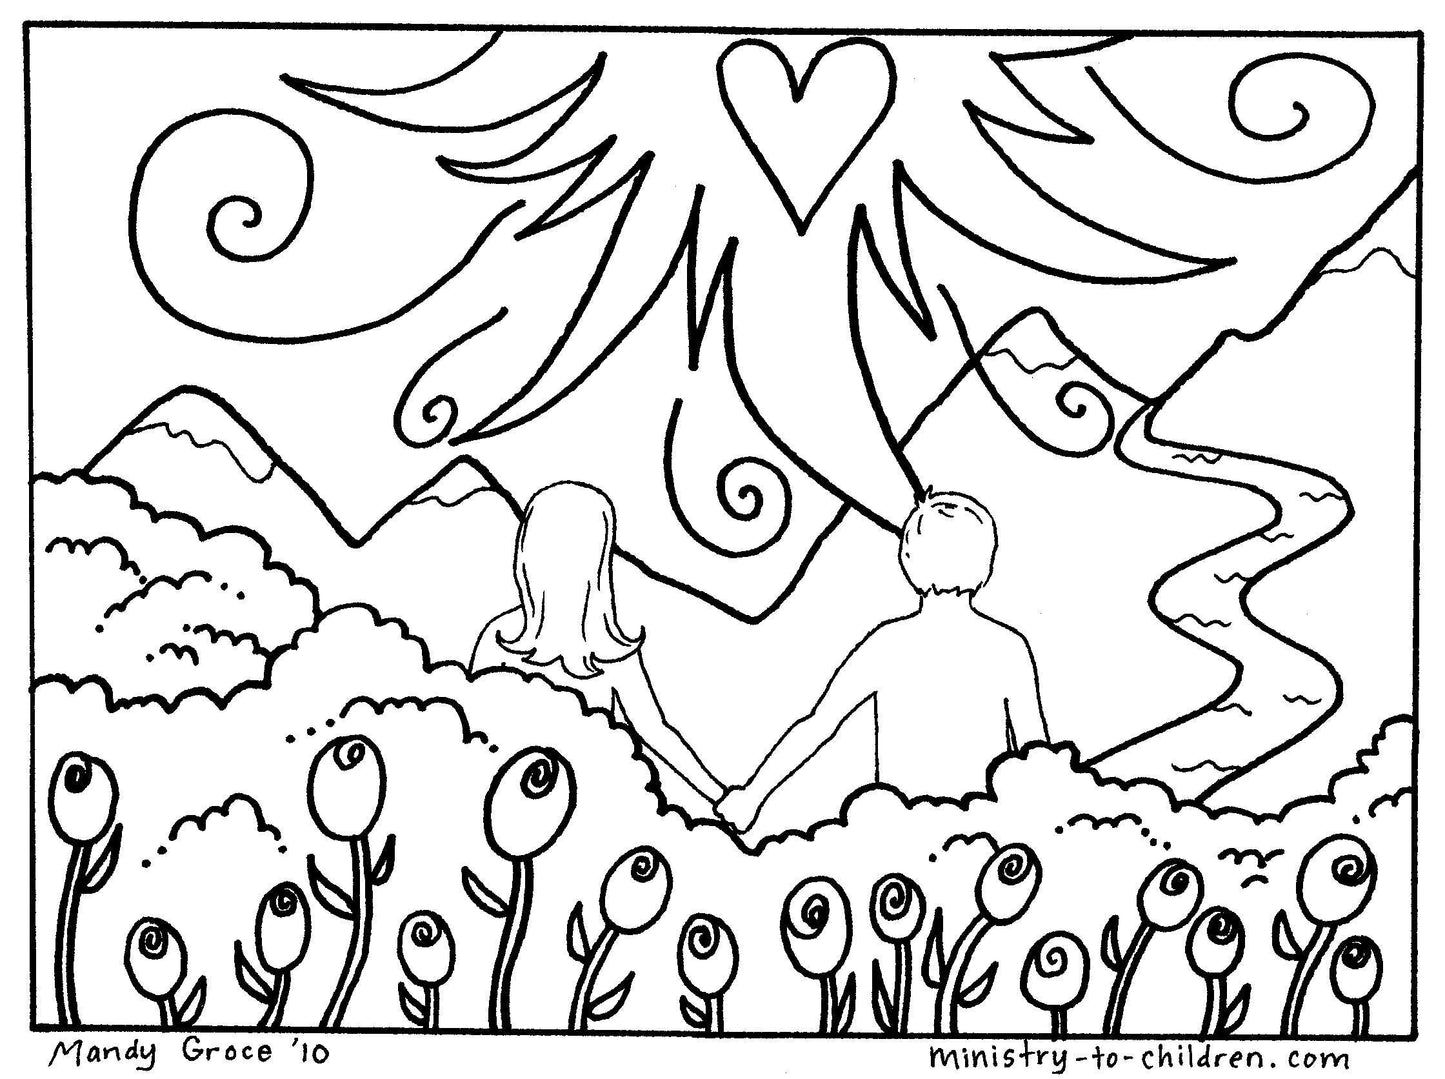 God's Good Creation - 23 Page Coloring Book & Teacher Talking Points - Sunday School Store 